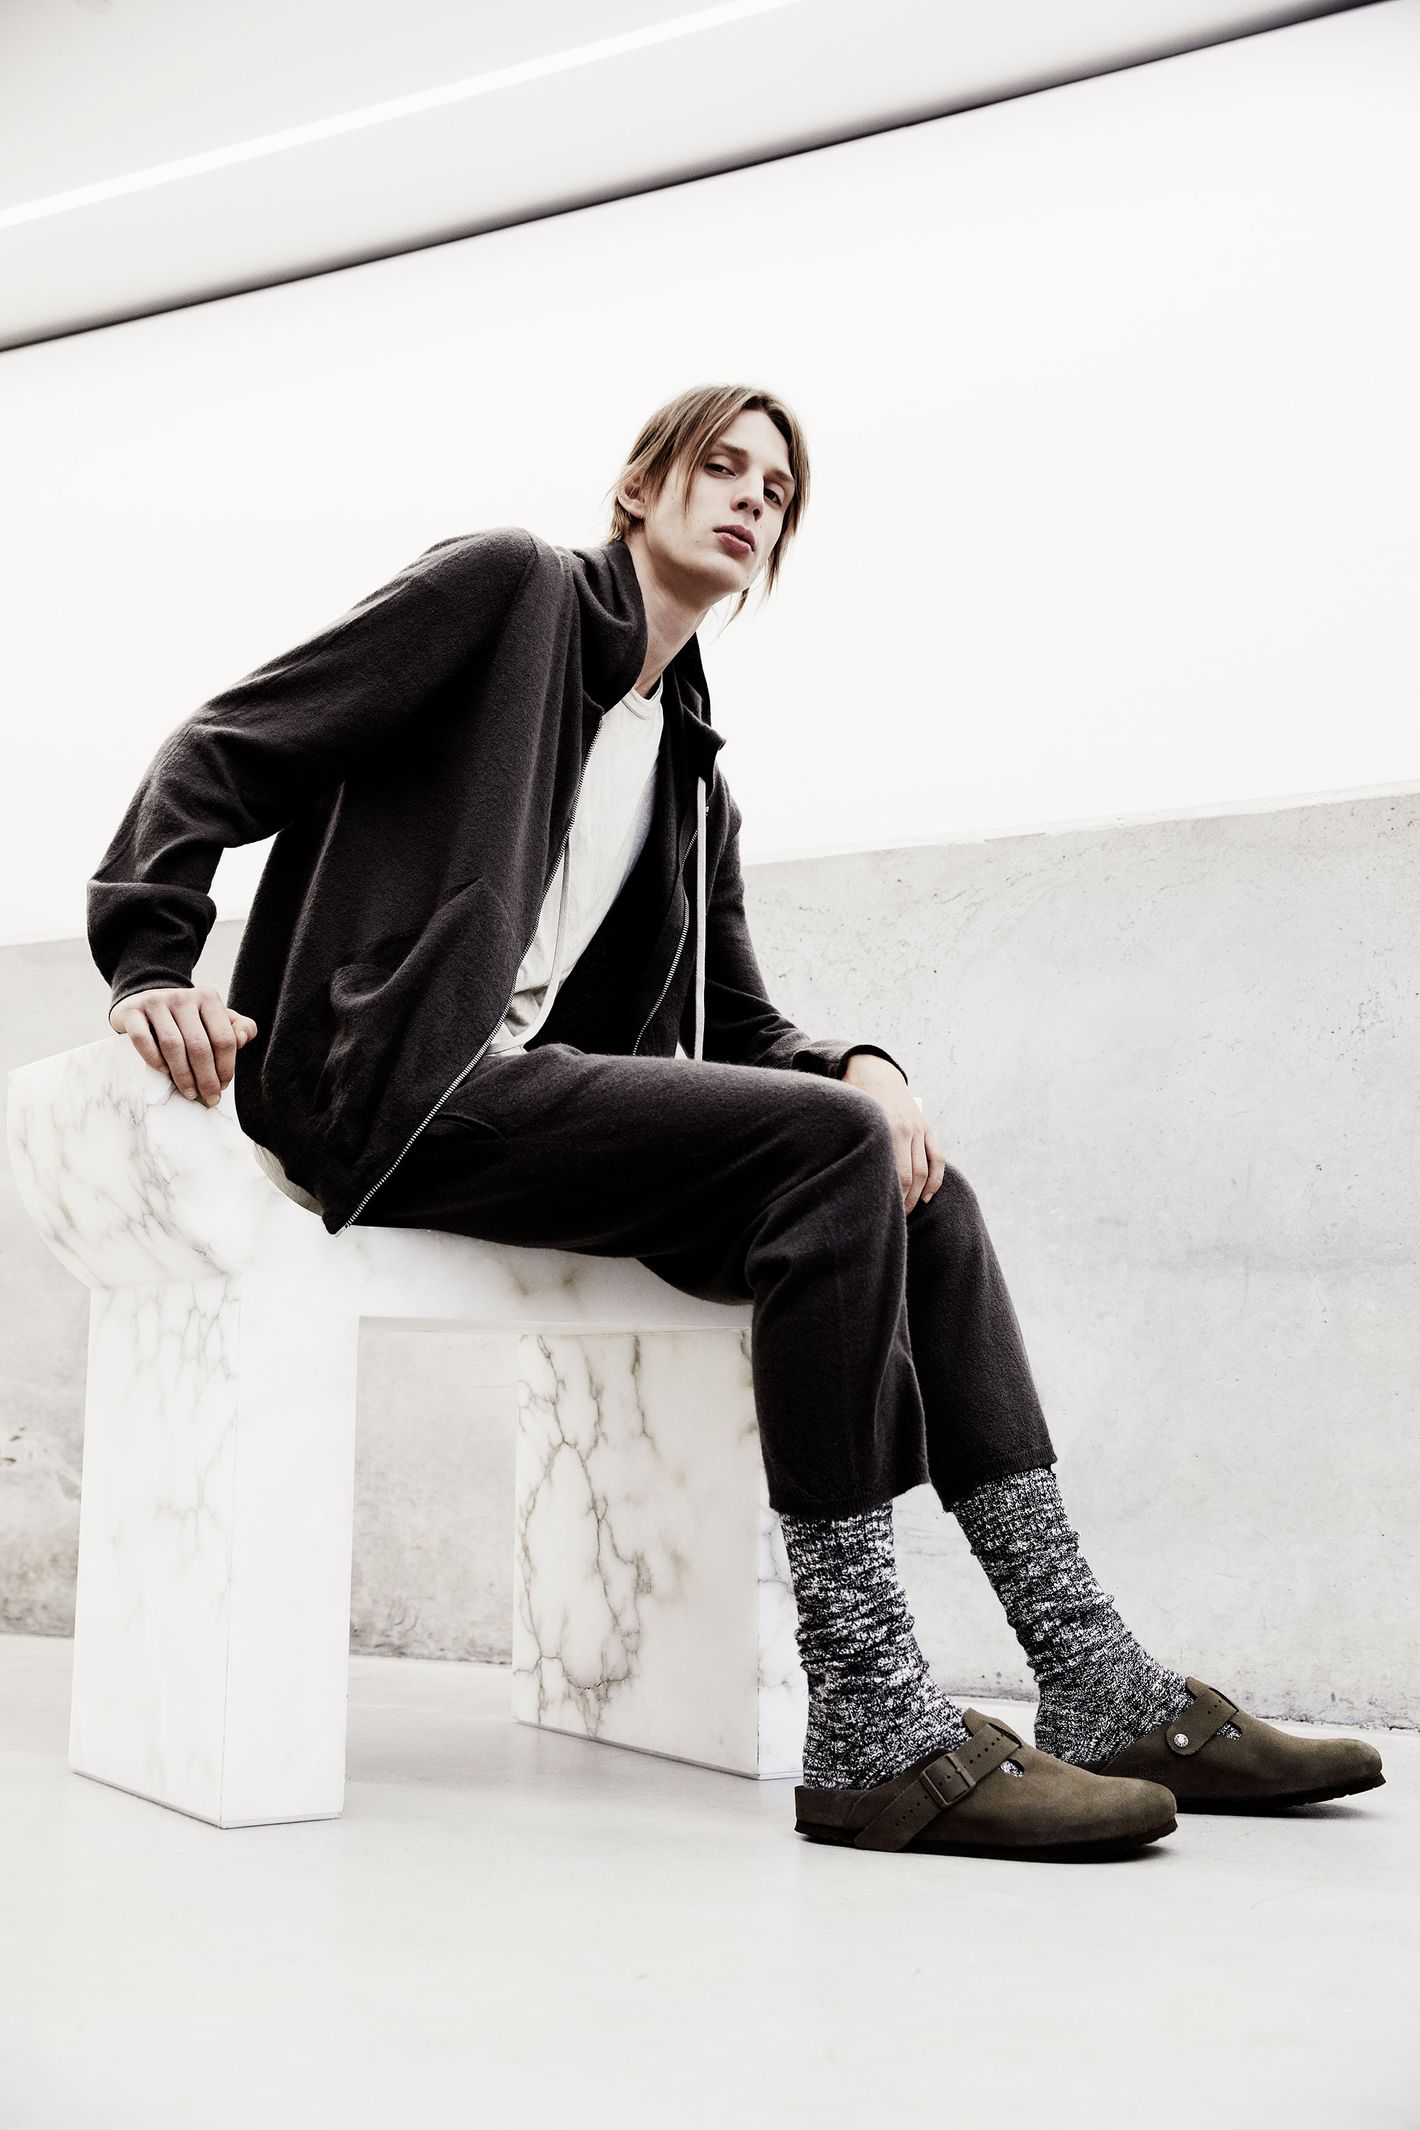 Rick Owens Designs a Capsule Collection for Birkenstock BOX